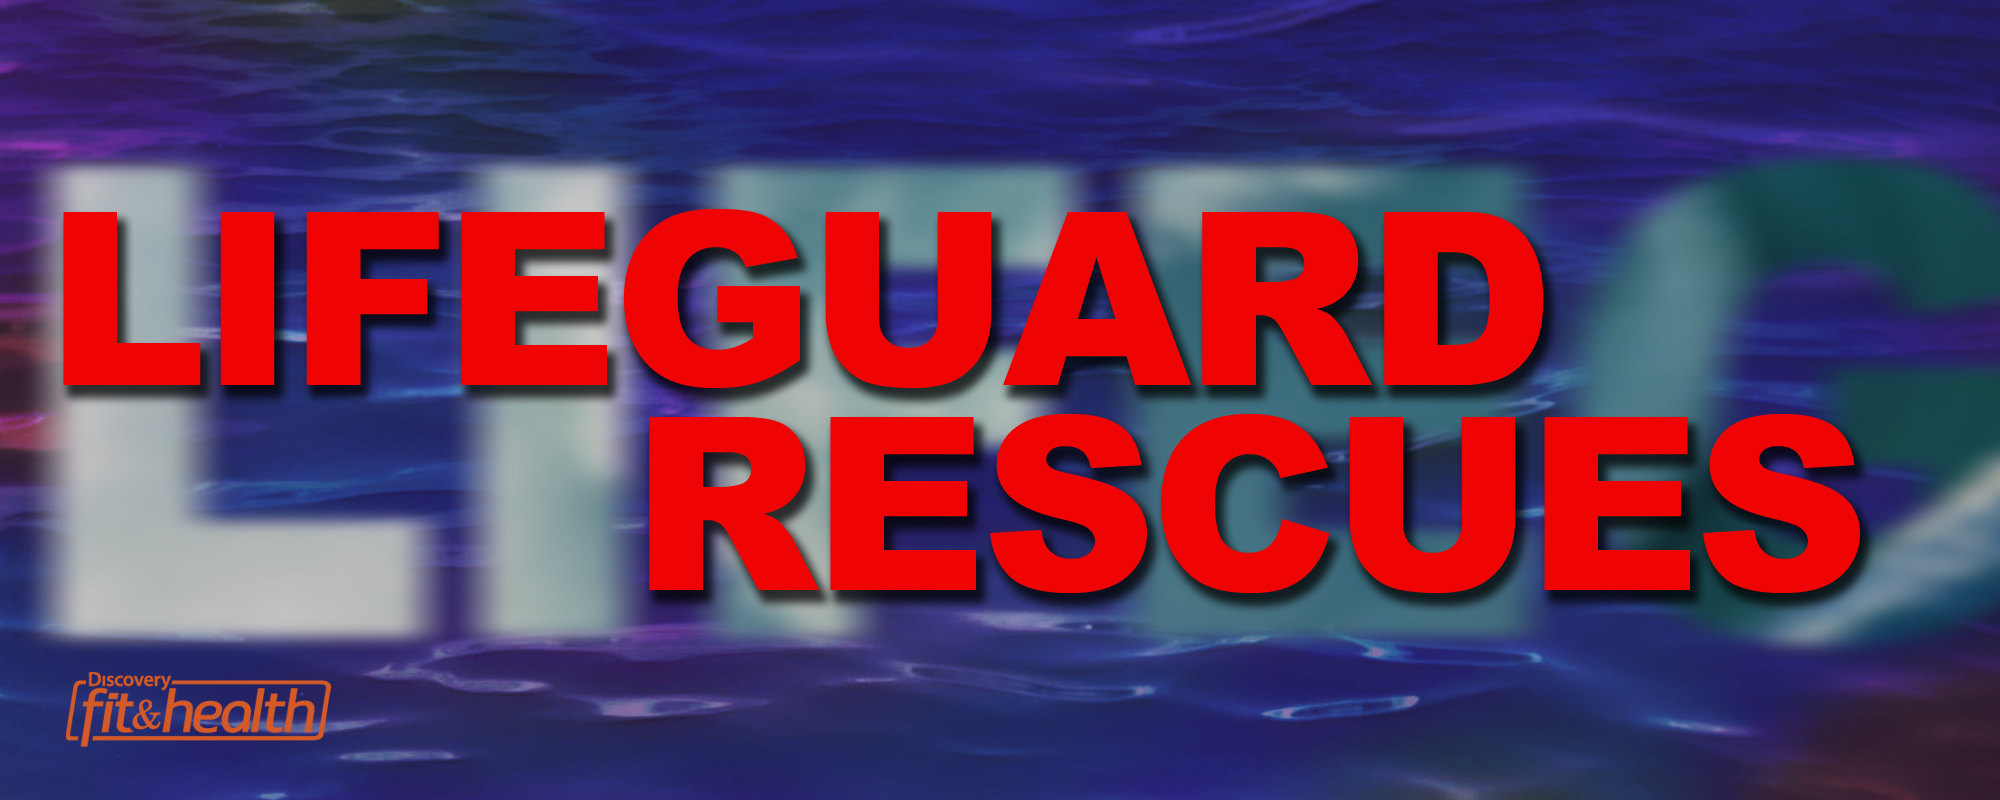 Lifeguard Rescues – Discovery Fit & Health